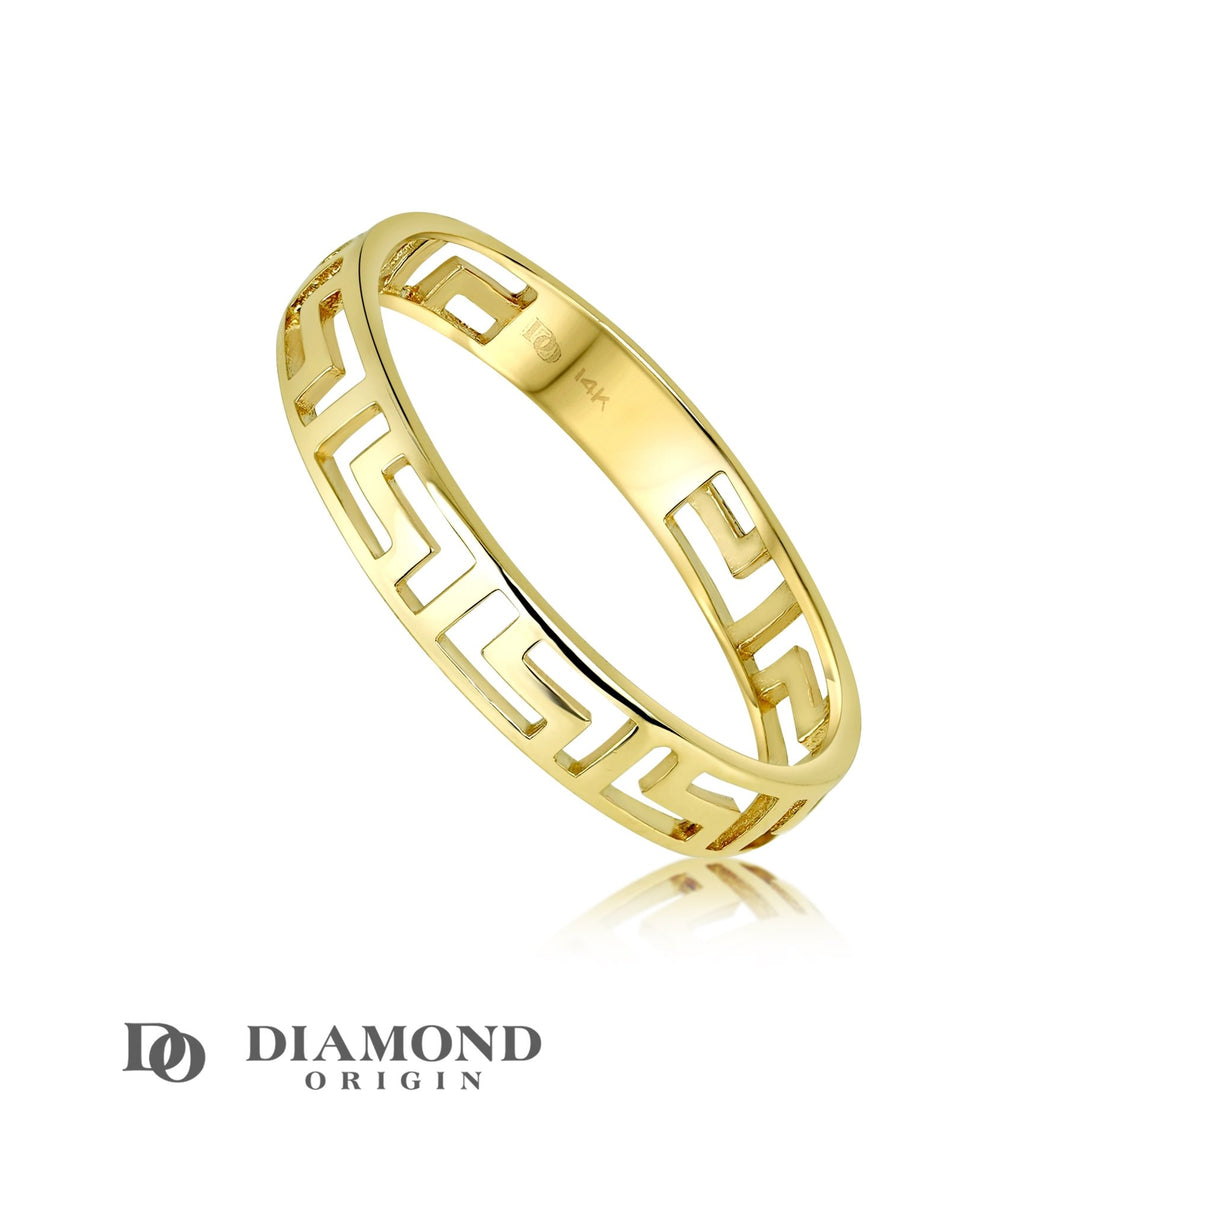 Crafted from 14K gold, the ring exudes a warm, luxurious glow that is accentuated by the intricate Greek design. With a slim profile, this ring is perfect for layering alongside other pieces or creating a subtle statement when worn alone.